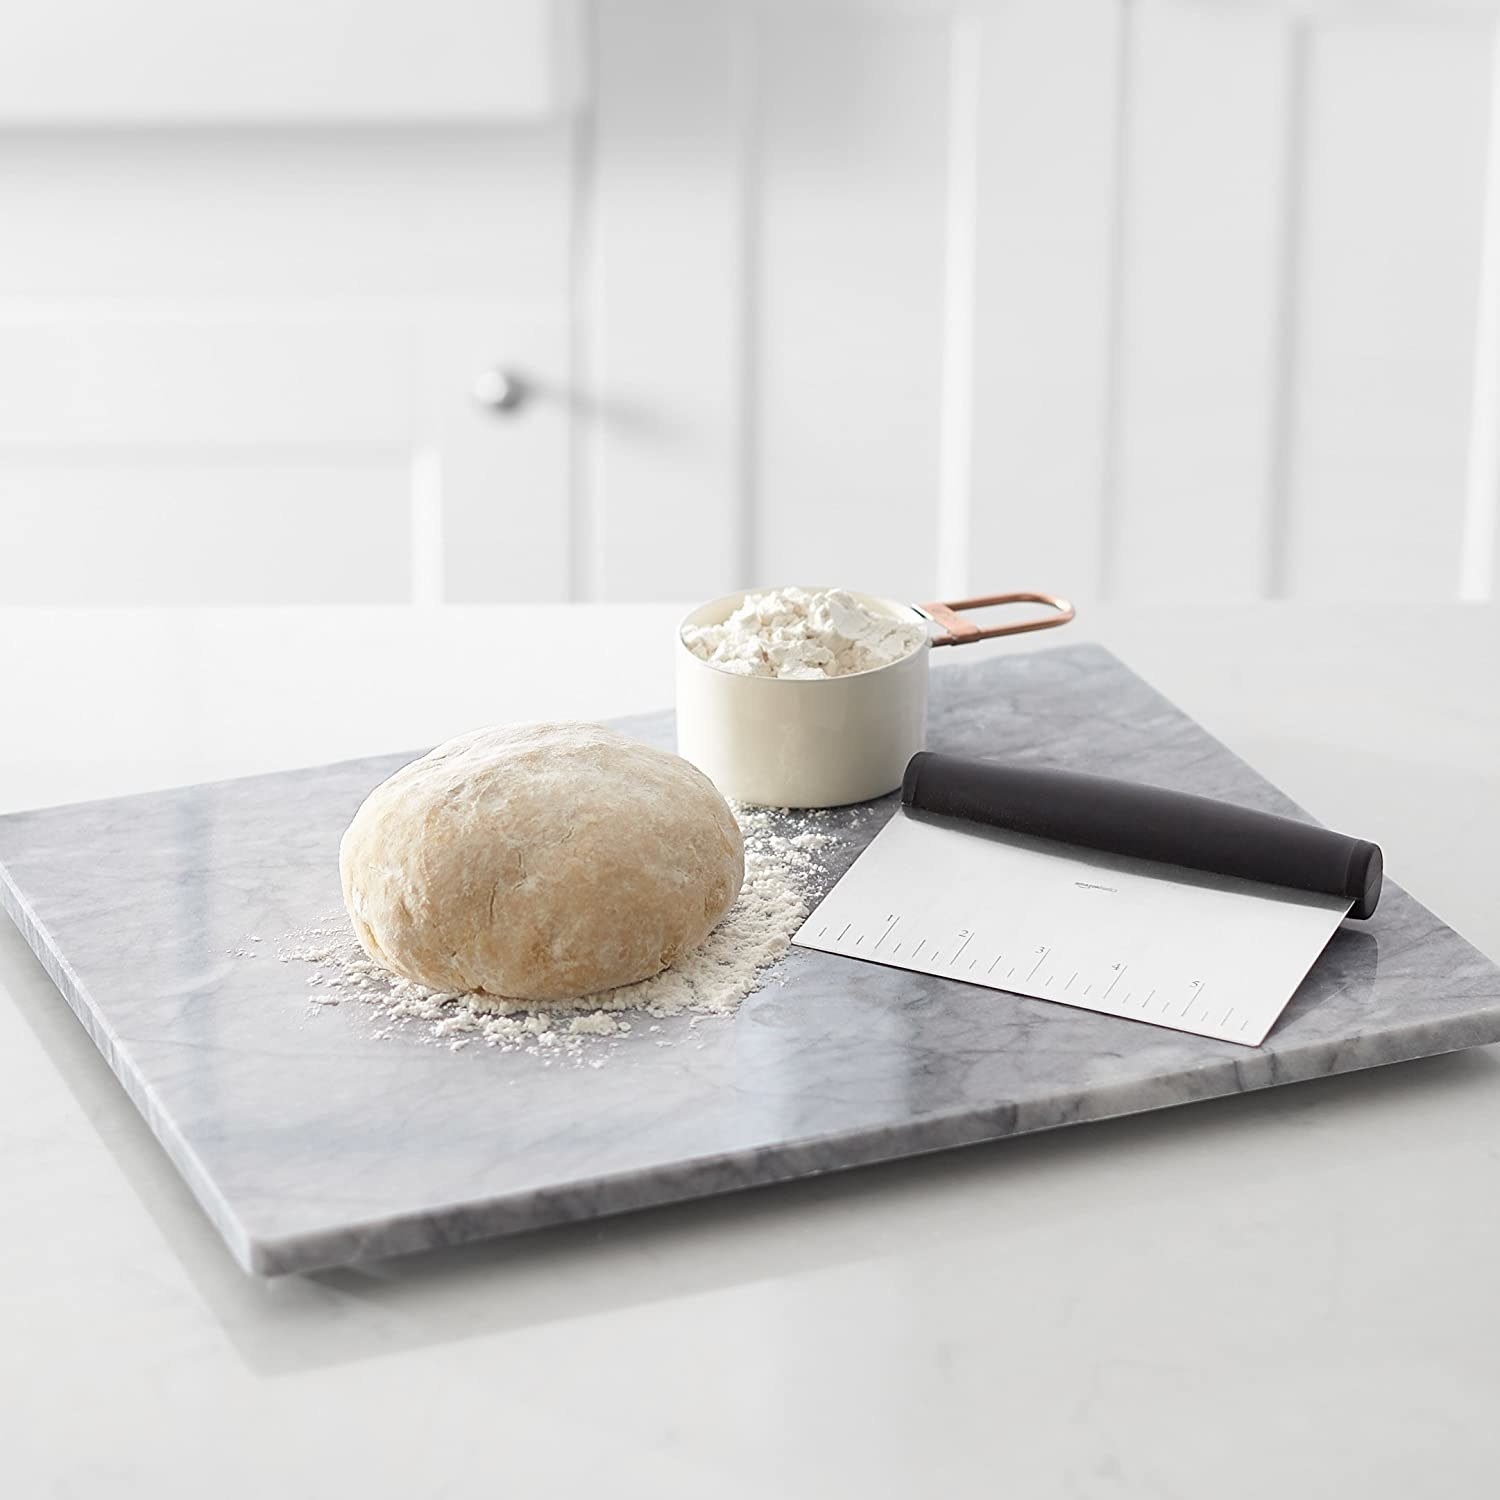 A stainless steel bench scraper kept beside a kneaded ball of dough and a cup of flour